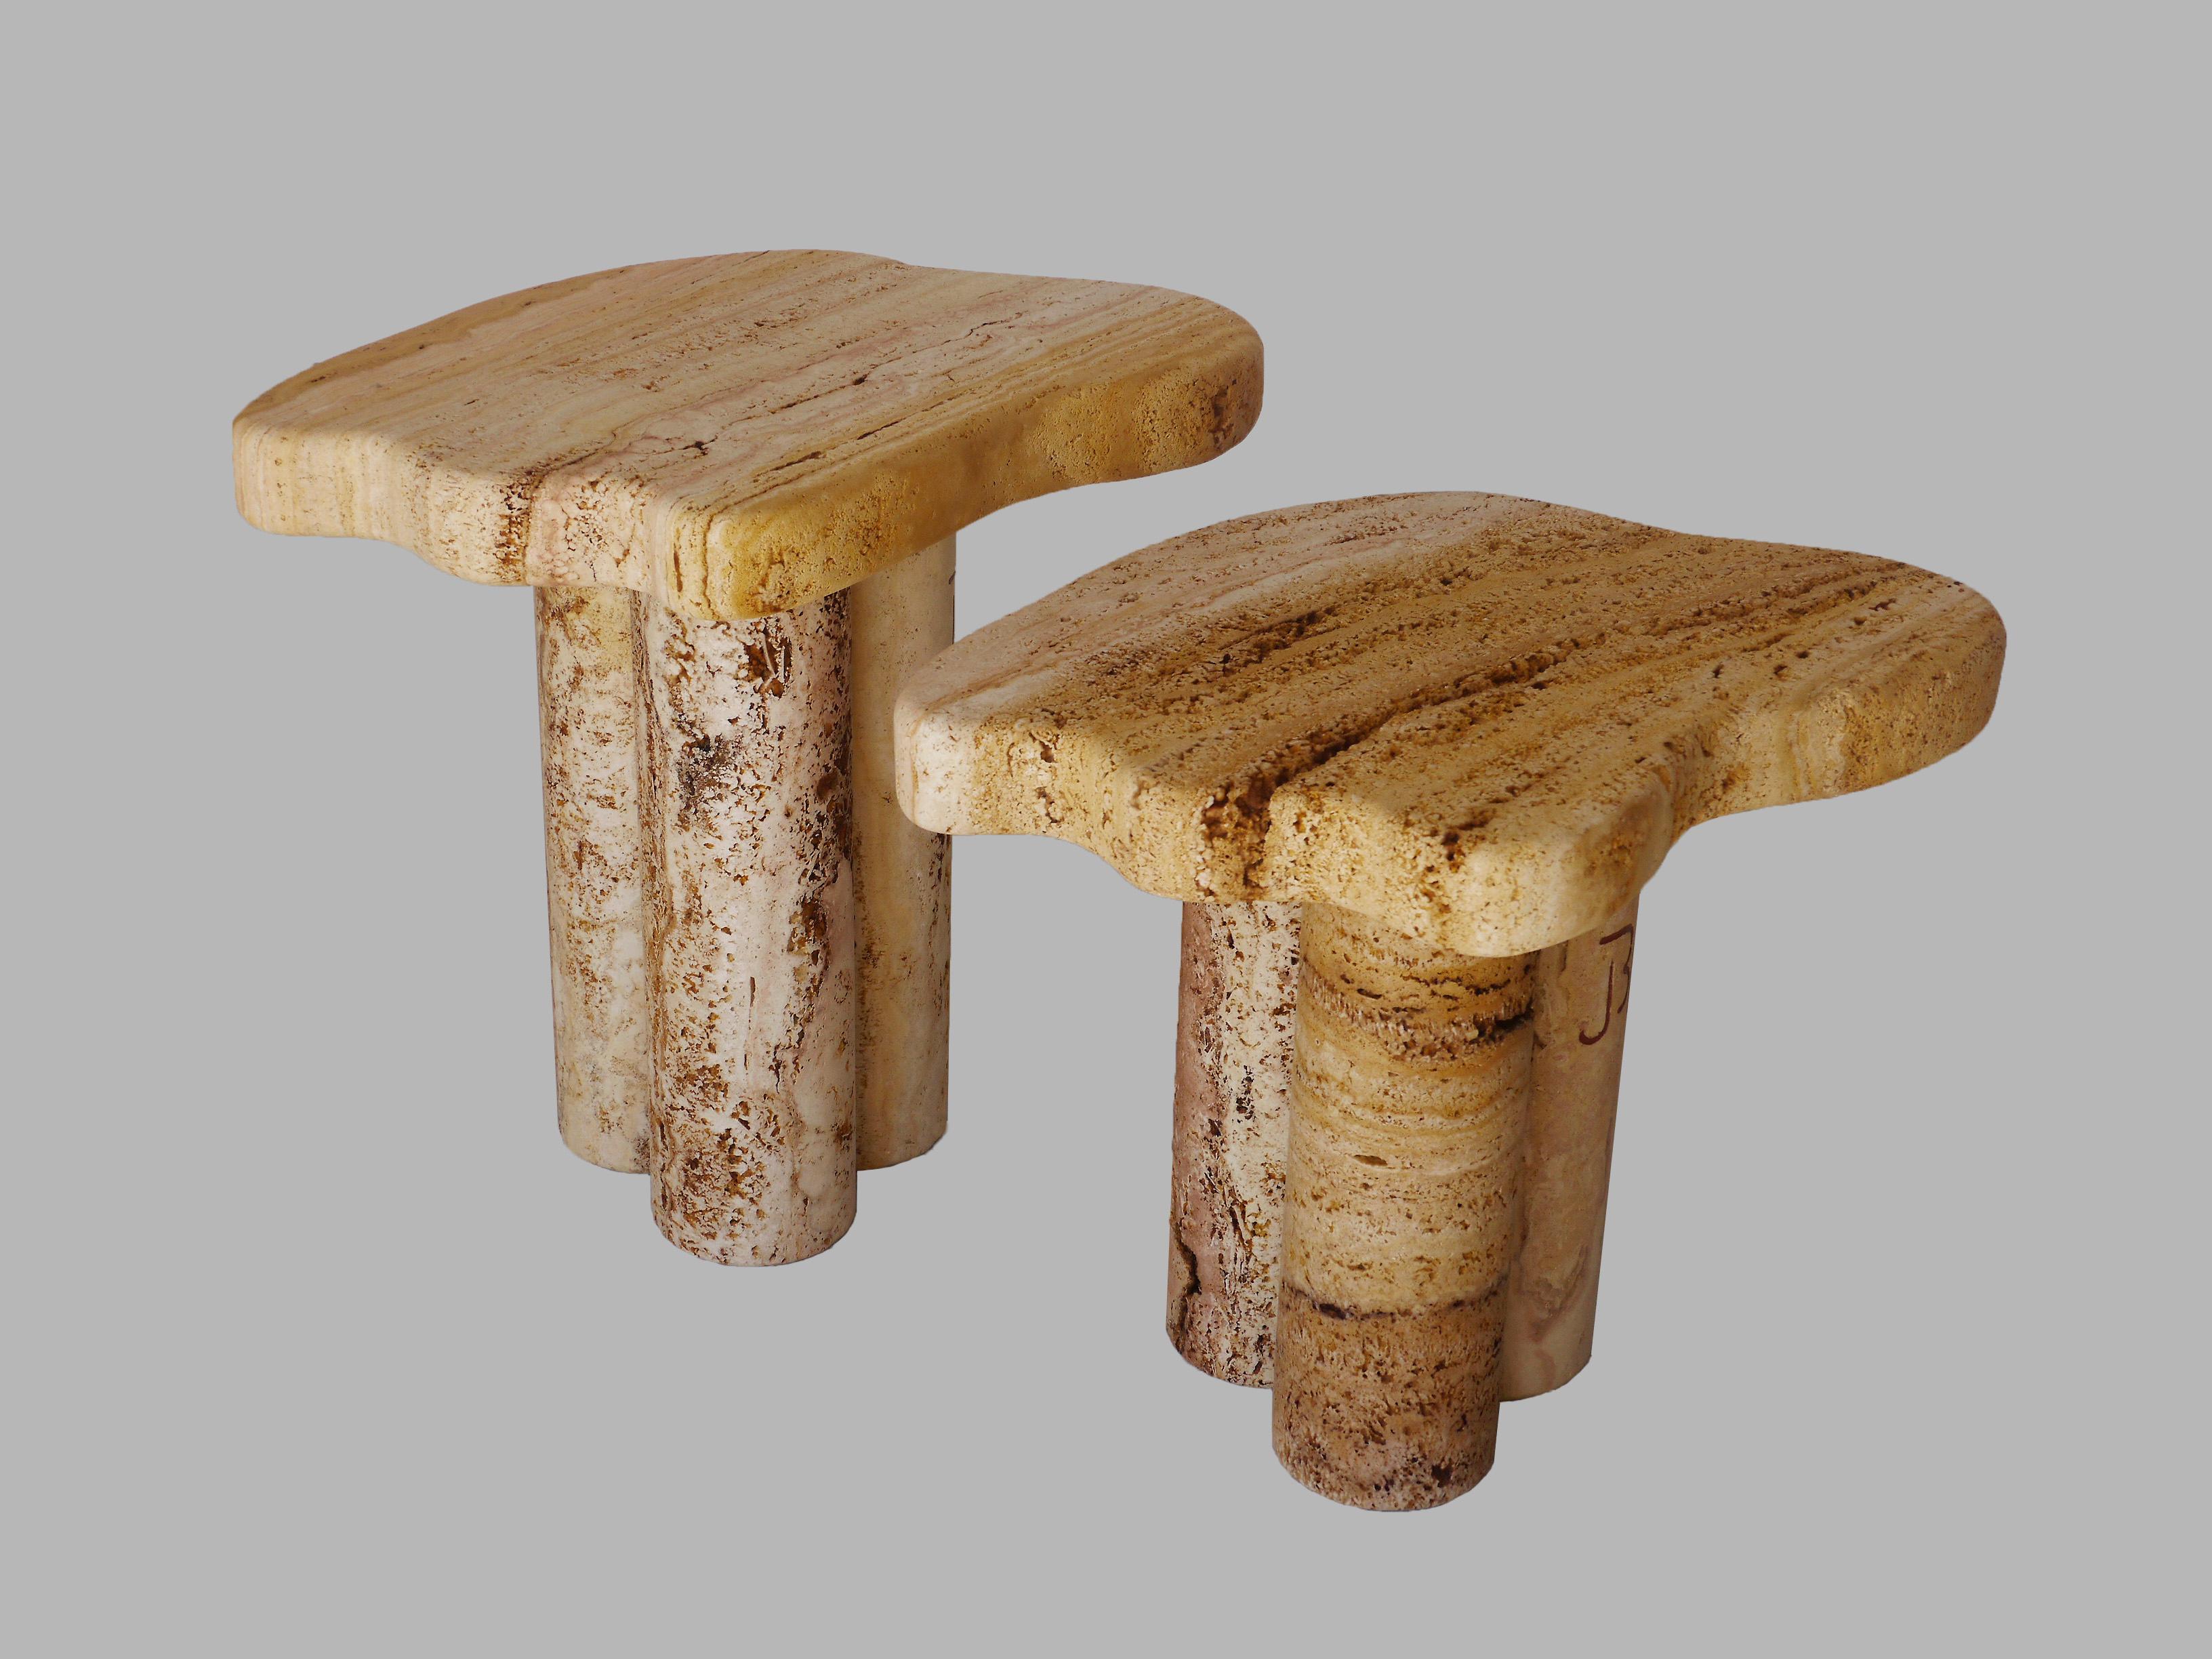 Set of 2 Clouds side tables by Jean-Fréderic Bourdier
Dimensions: D 27 x W 46 x H 45 cm
Materials: Travertine.
Also available in other height: 40cm.

Mostly guided by his sculptor skills JFB and his life time strong attraction for nature, has